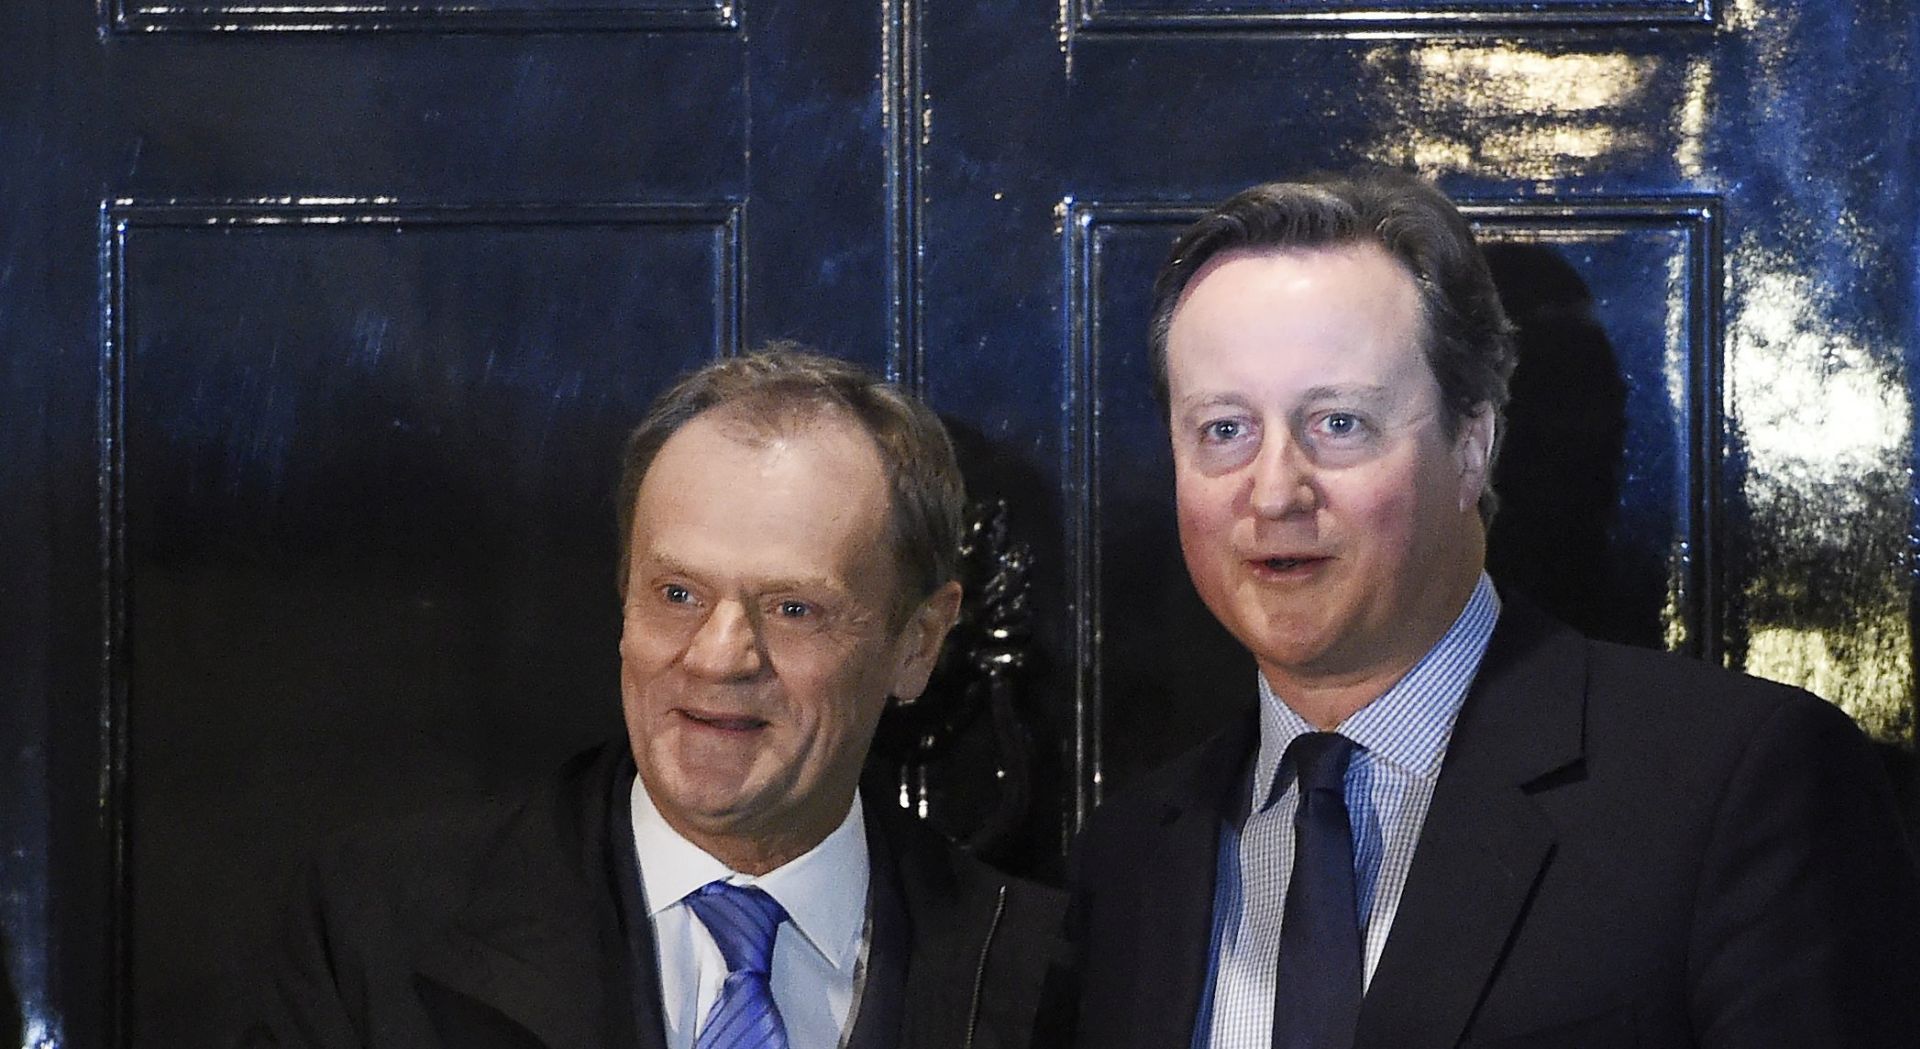 epa05137701 Britain's Prime Minister David Cameron (R) meets the President of the European Council, Donald Tusk (L), on the steps of No. 10 Downing Street, in London, Britain, 31 January 2016. EU President Donald Tusk arrived in London on Sunday for talks over dinner with Prime Minister David Cameron on Britain's demand for EU reforms, with Tusk expected to release his proposed response to the demands in the next few days.  EPA/FACUNDO ARRIZABALAGA